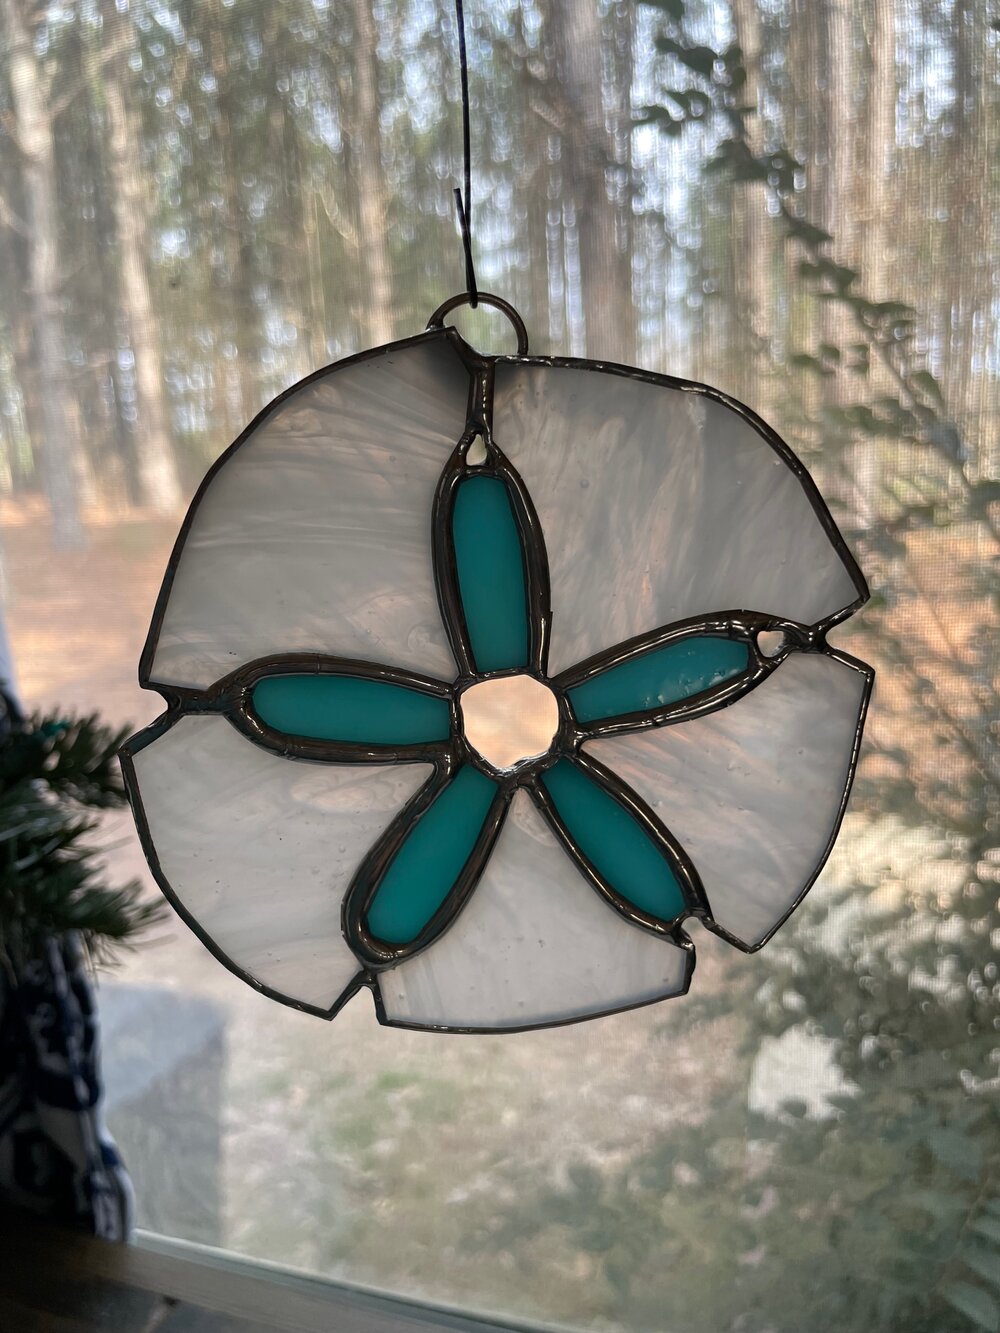 Sand Dollar Stained Glass